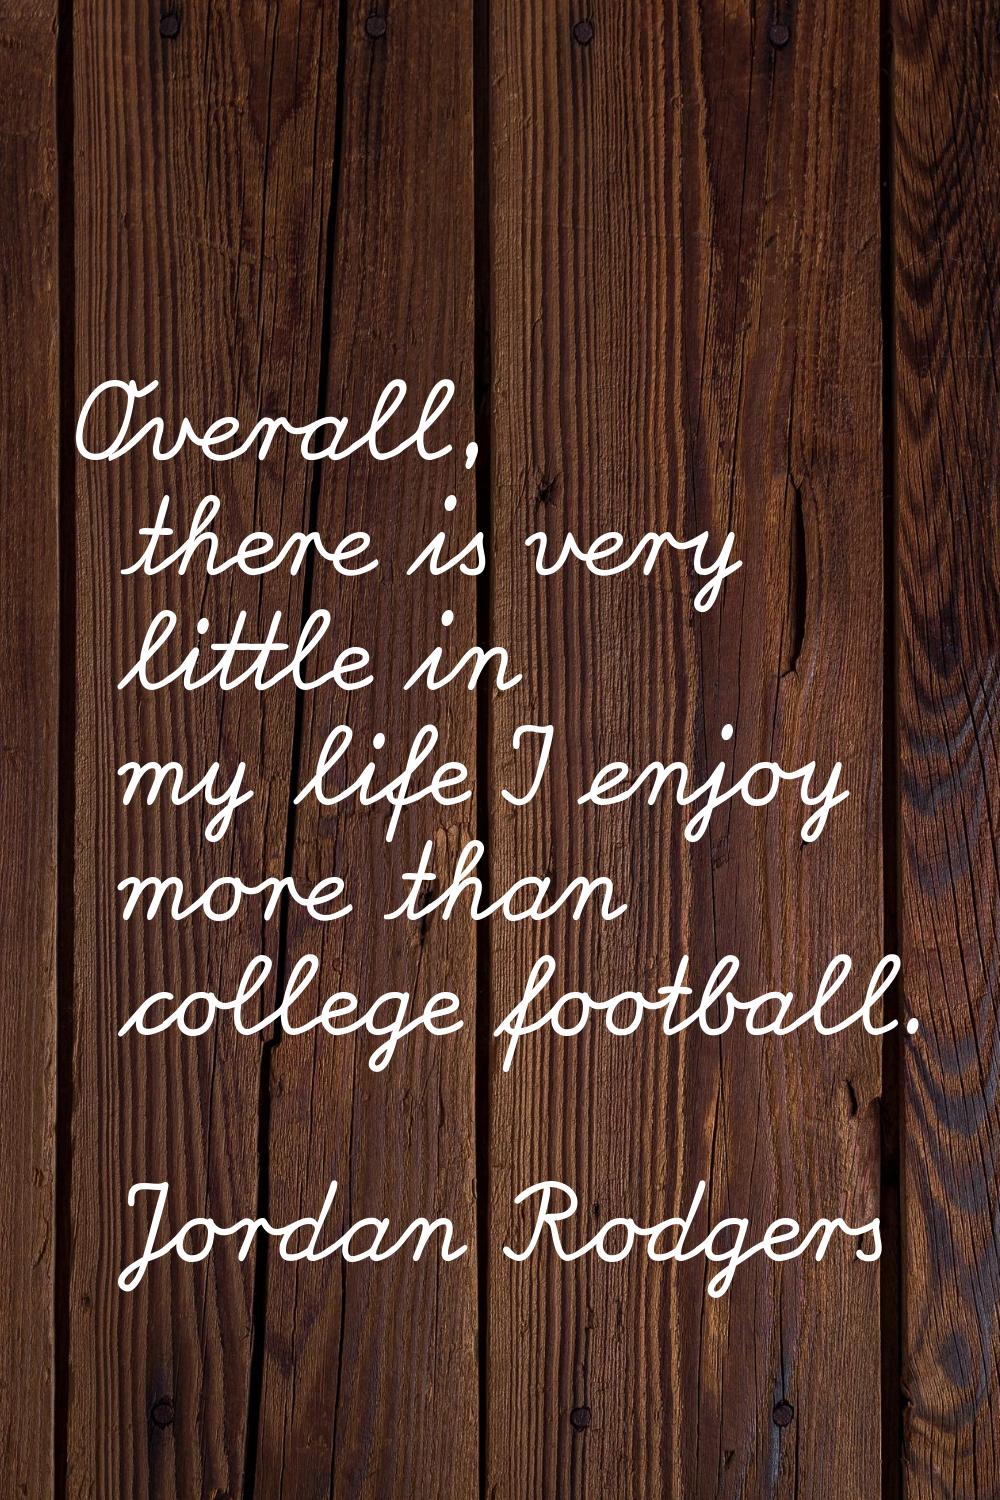 Overall, there is very little in my life I enjoy more than college football.